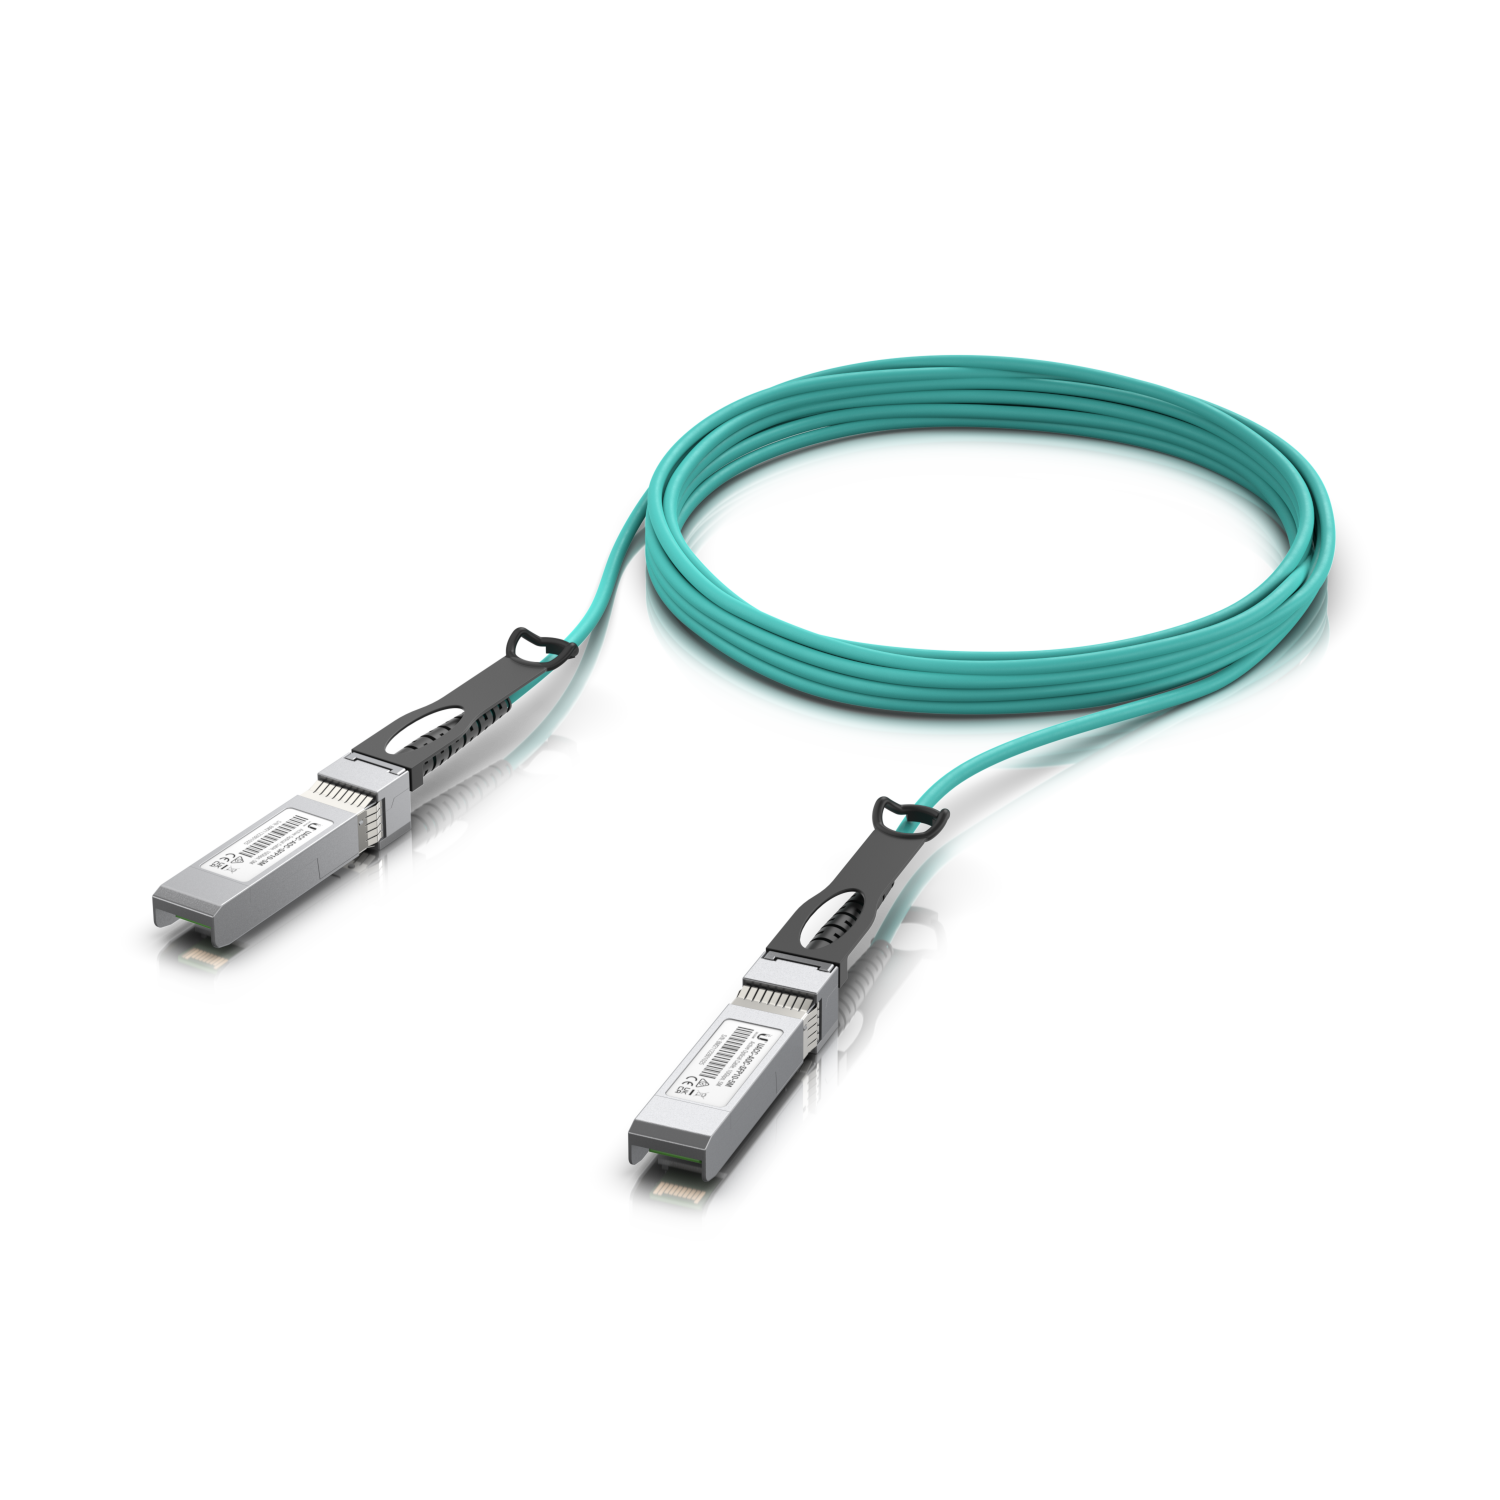 Ubiquiti 10 Gbps Long-Range Direct Attach Cable